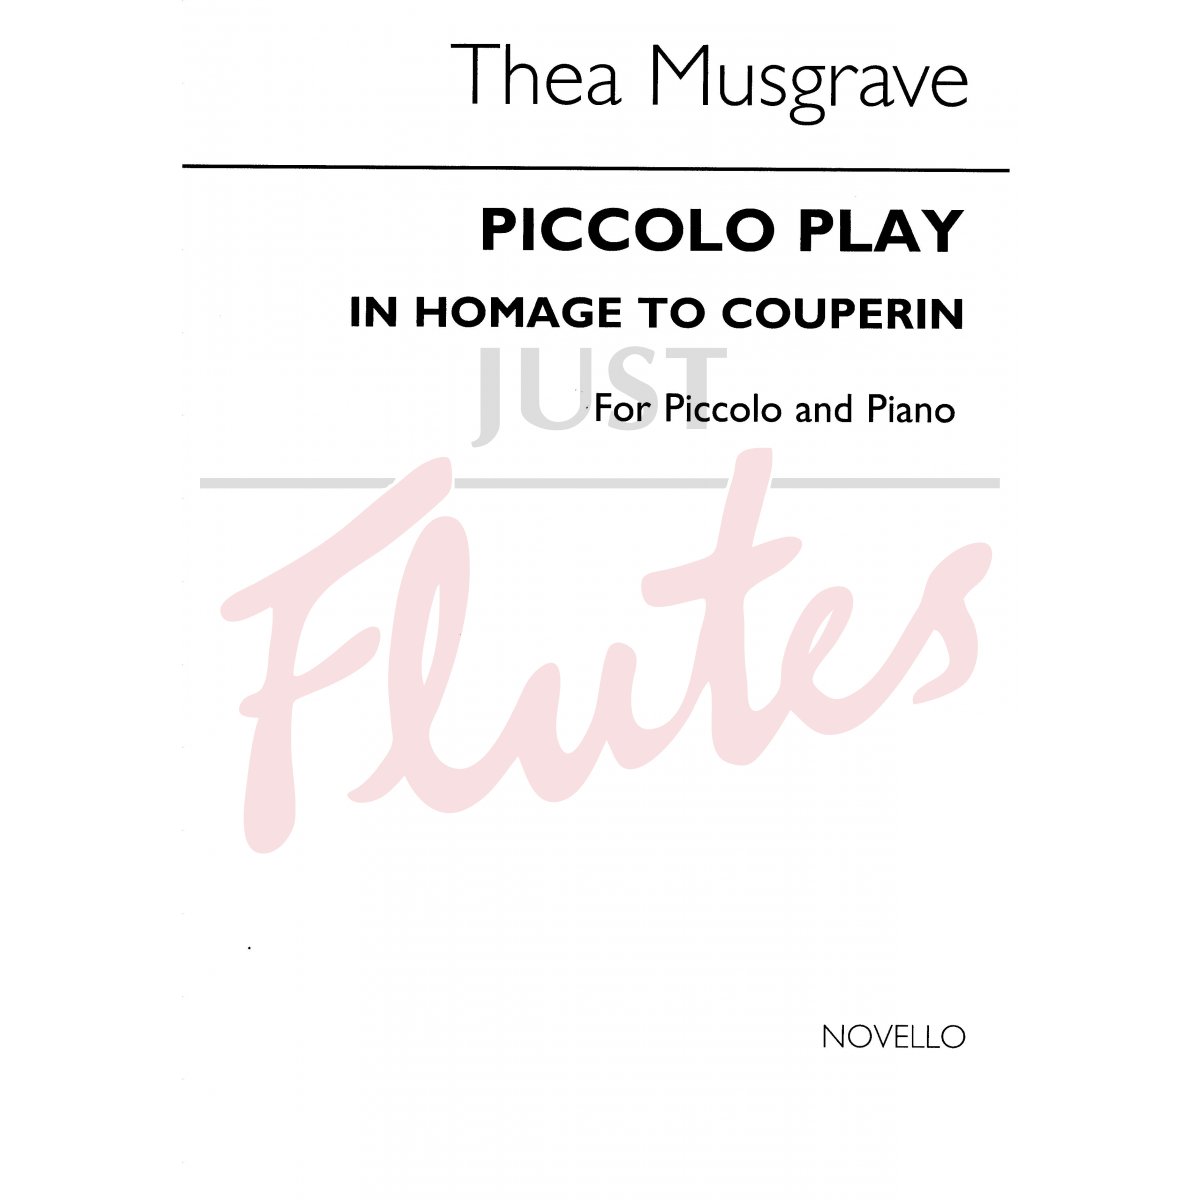 Piccolo Play: In Homage to Couperin for Piccolo and Piano